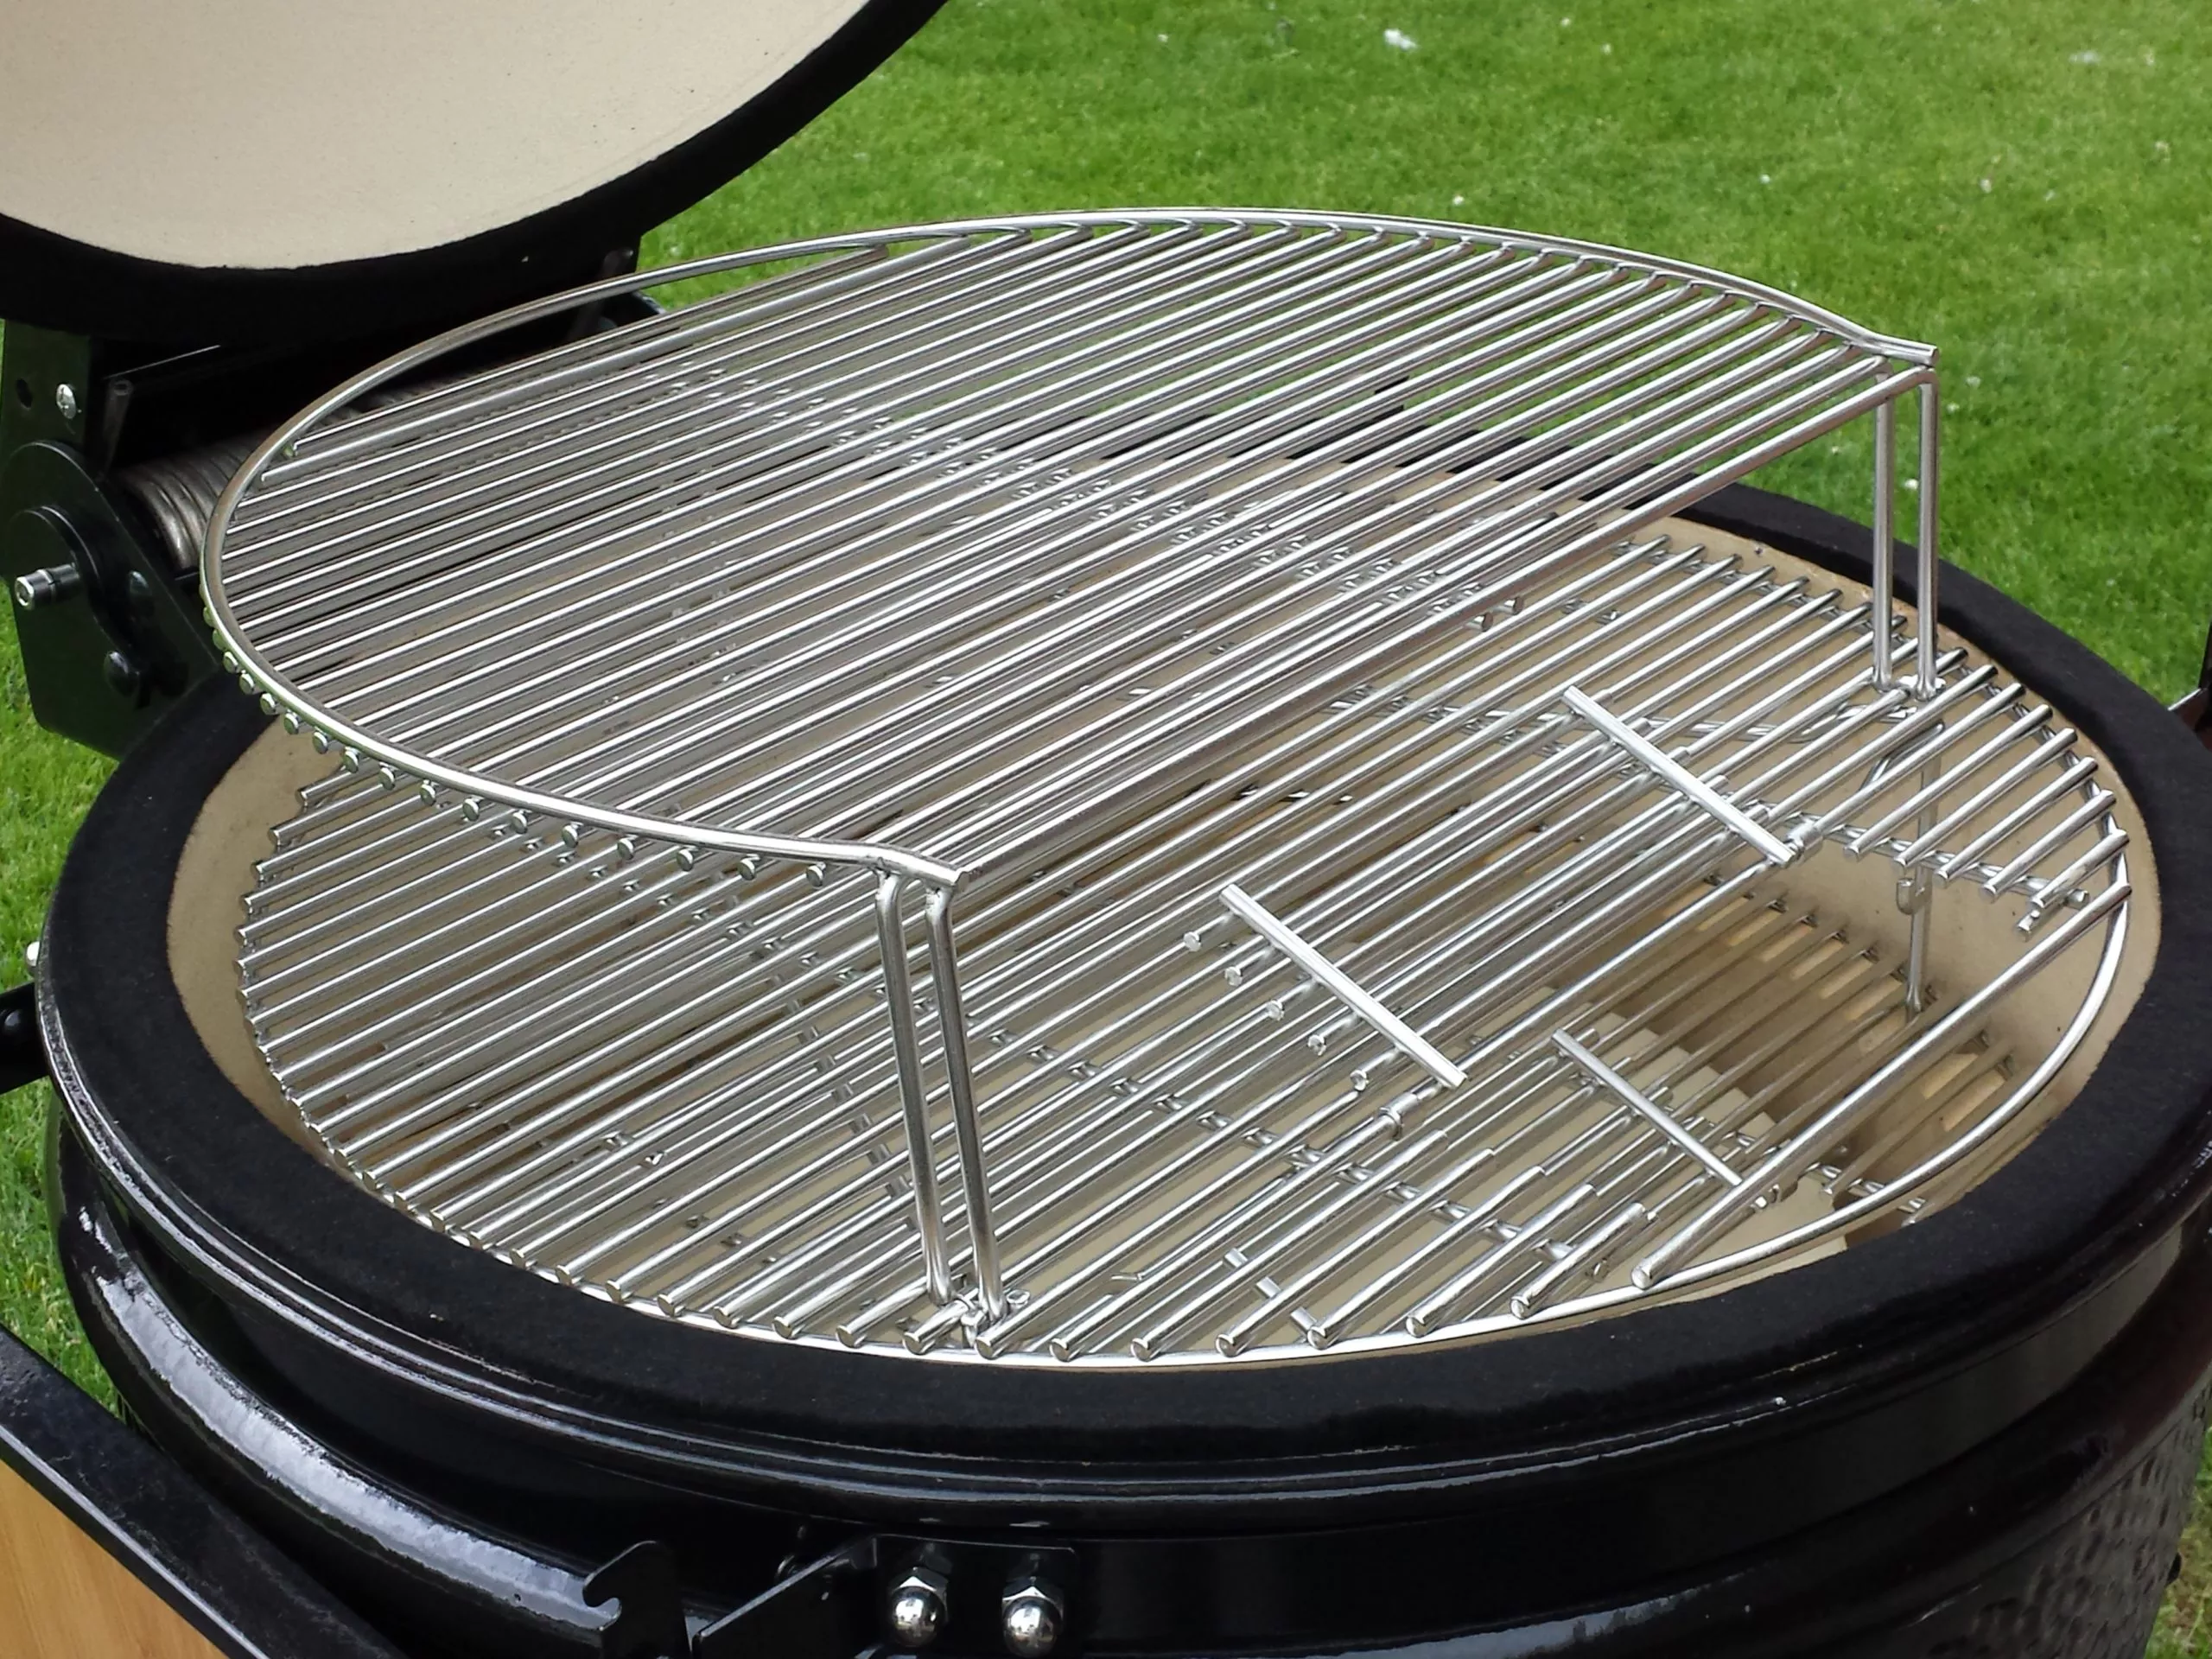 Secondary Cooking Grid in a 23" Grill